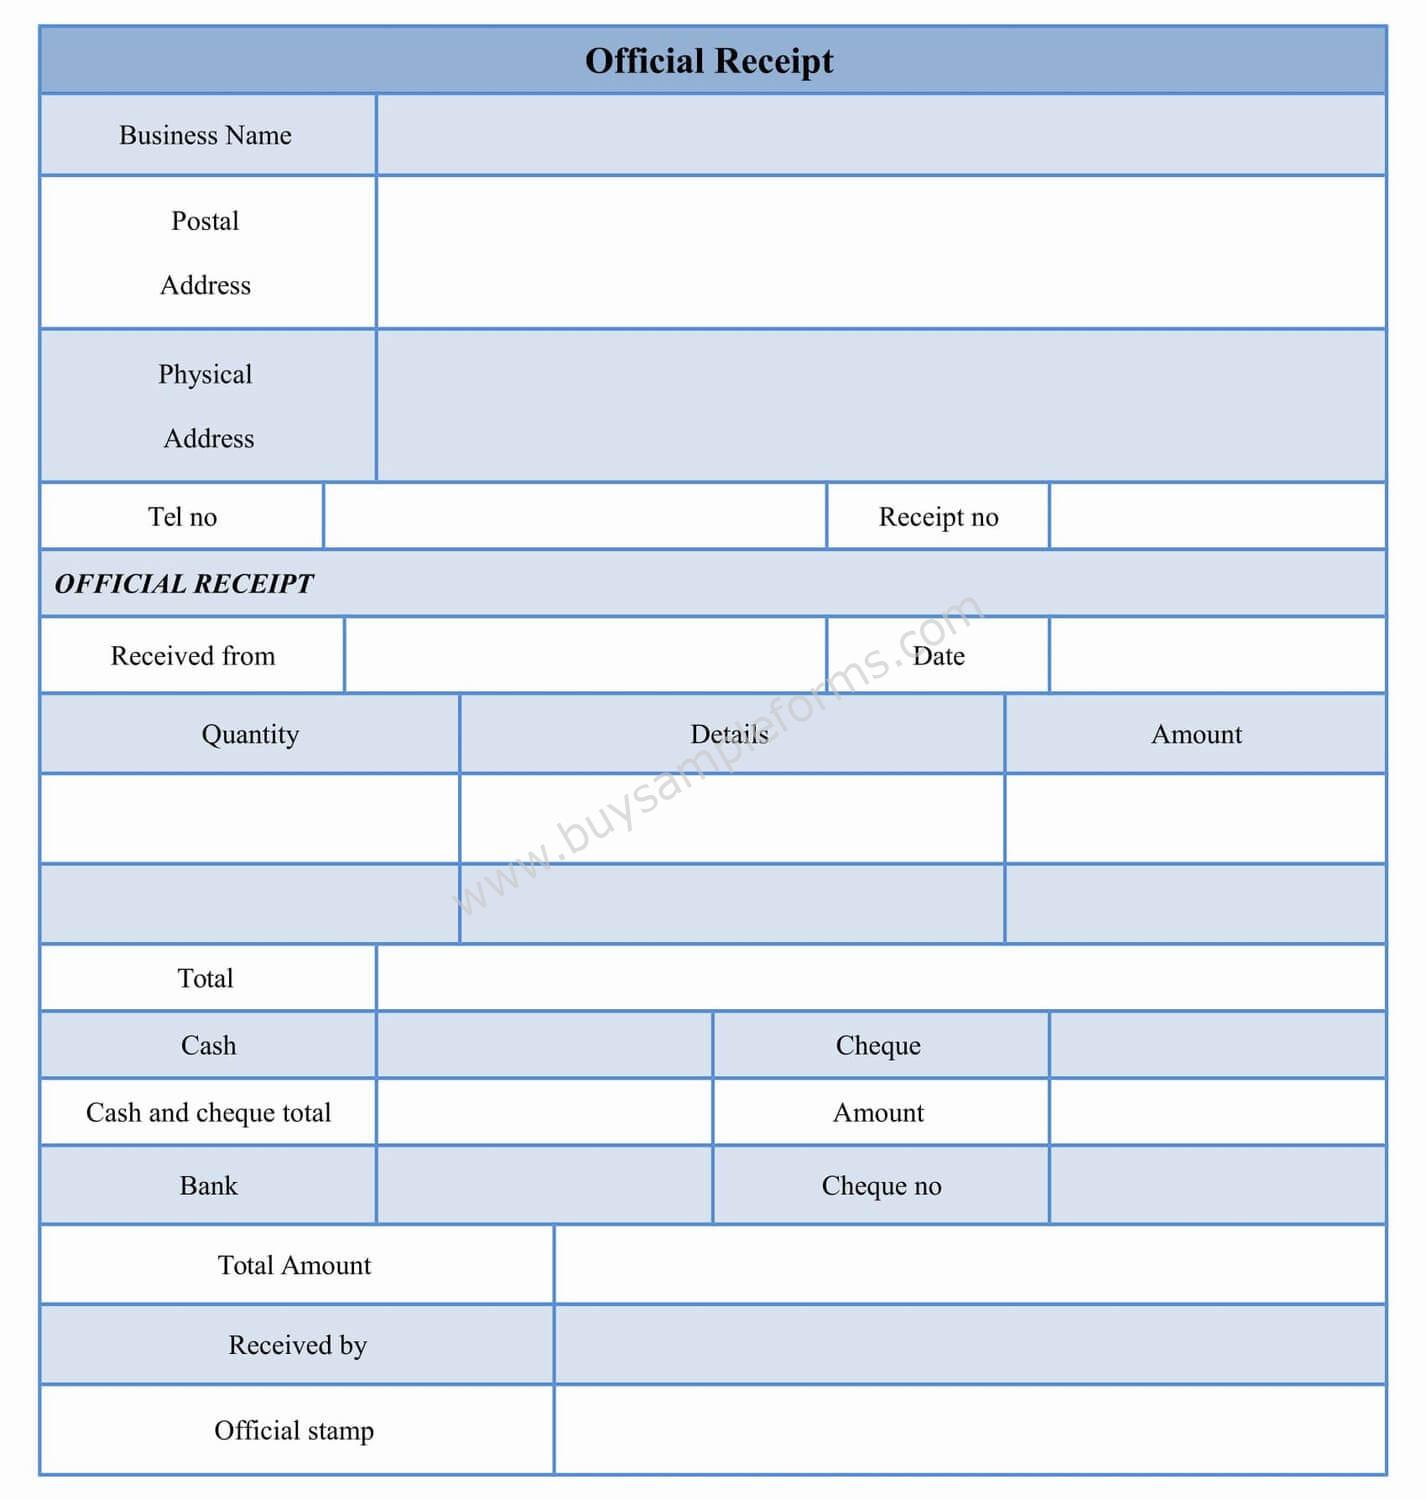 Official Receipt Form Template Word